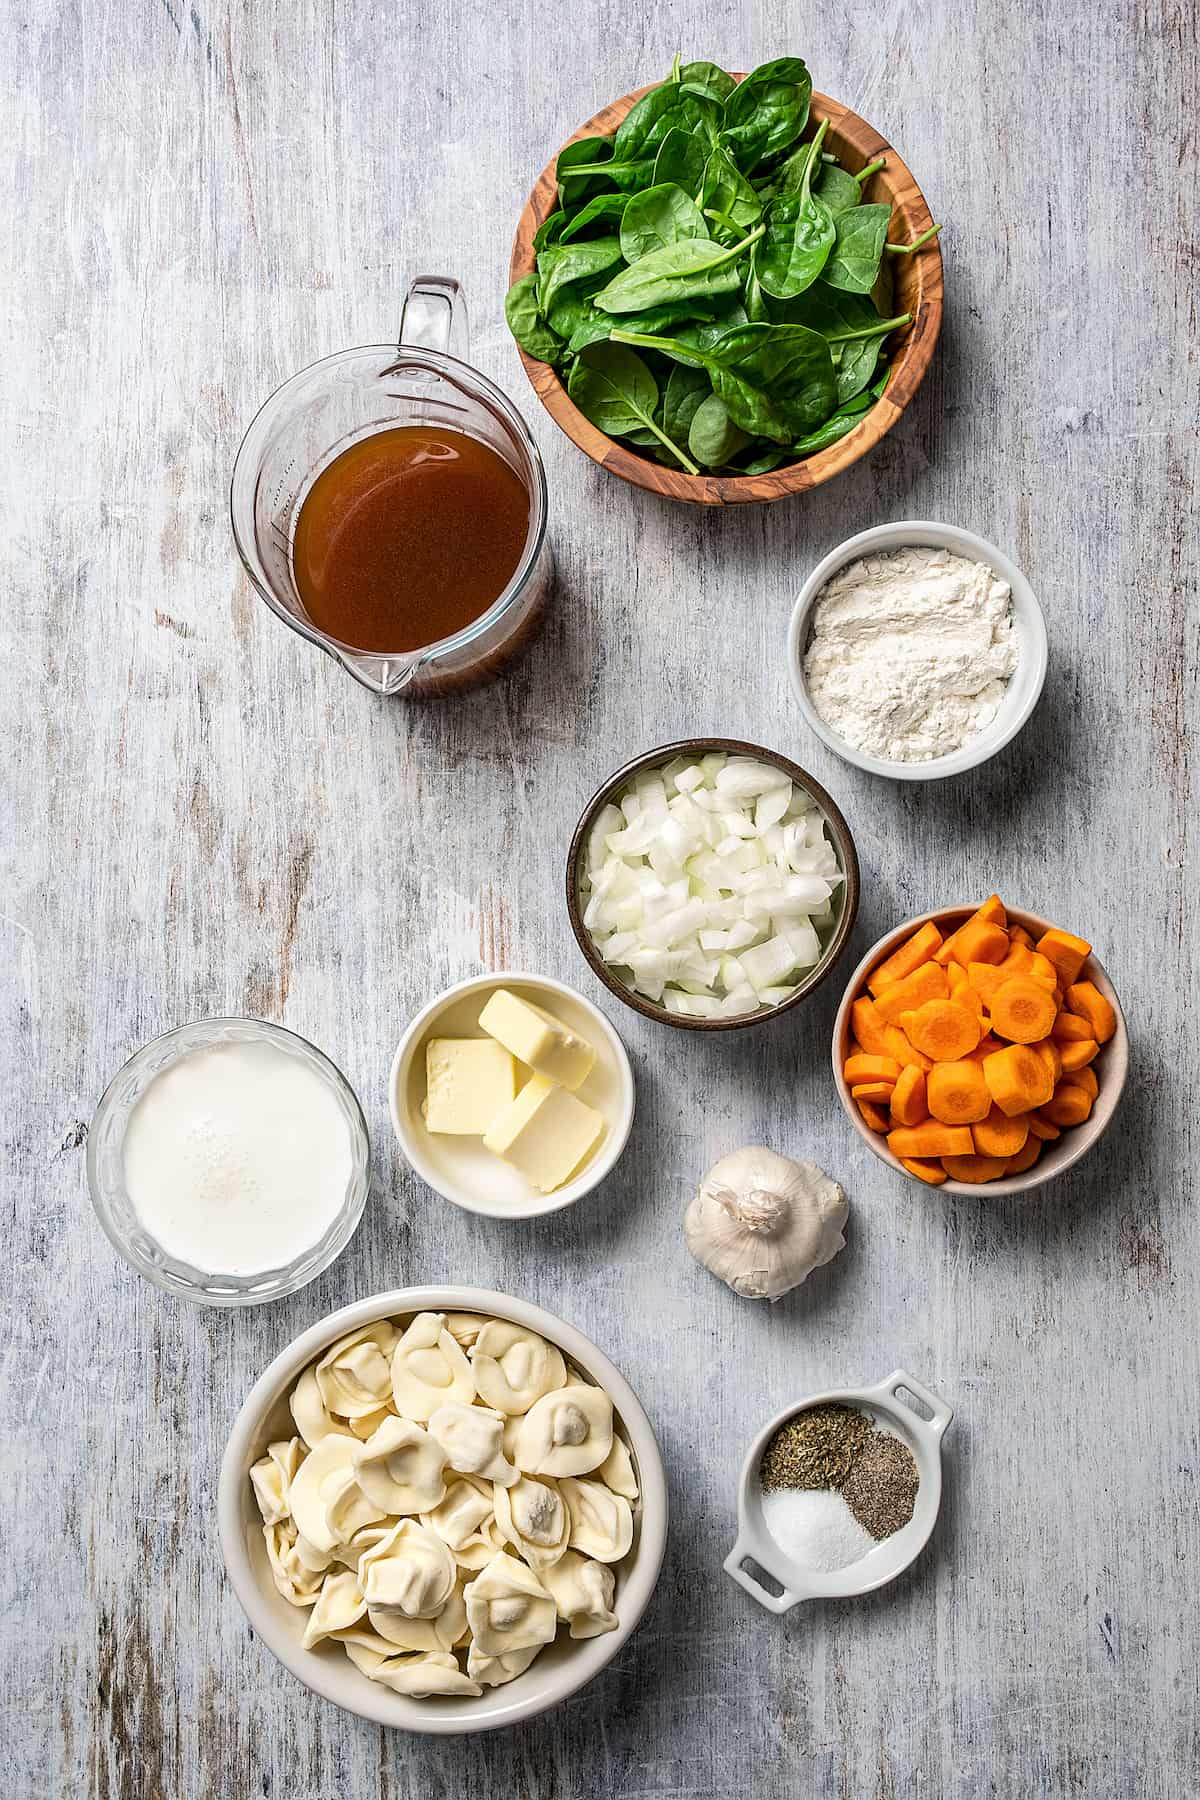 The ingredients for creamy tortellini soup.